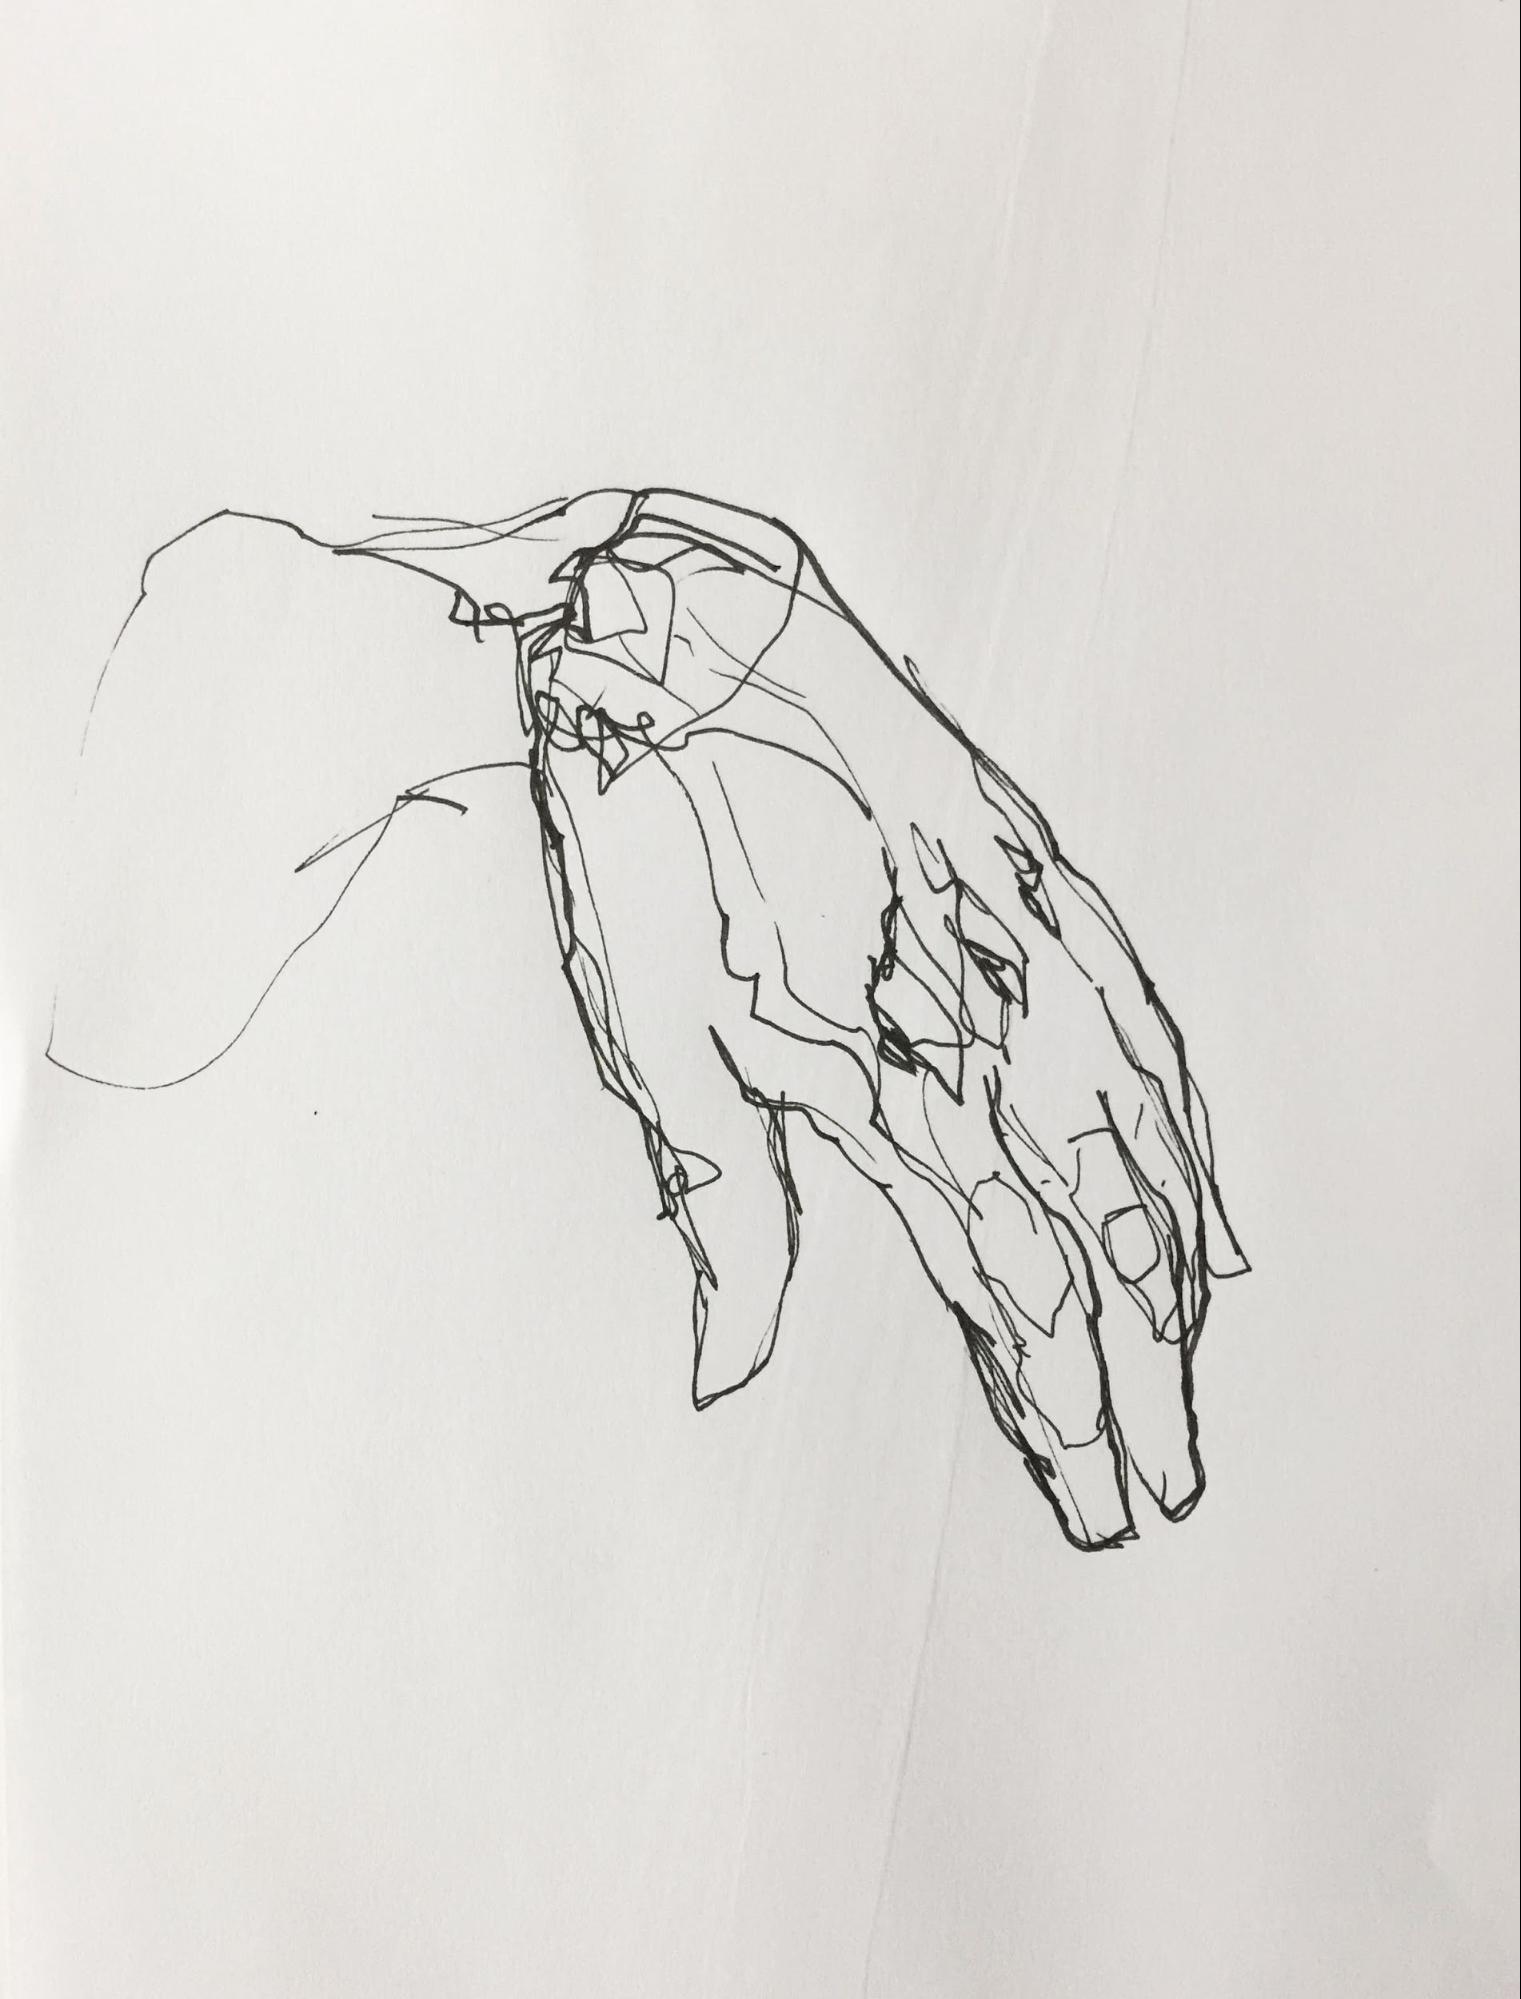 How to draw hands